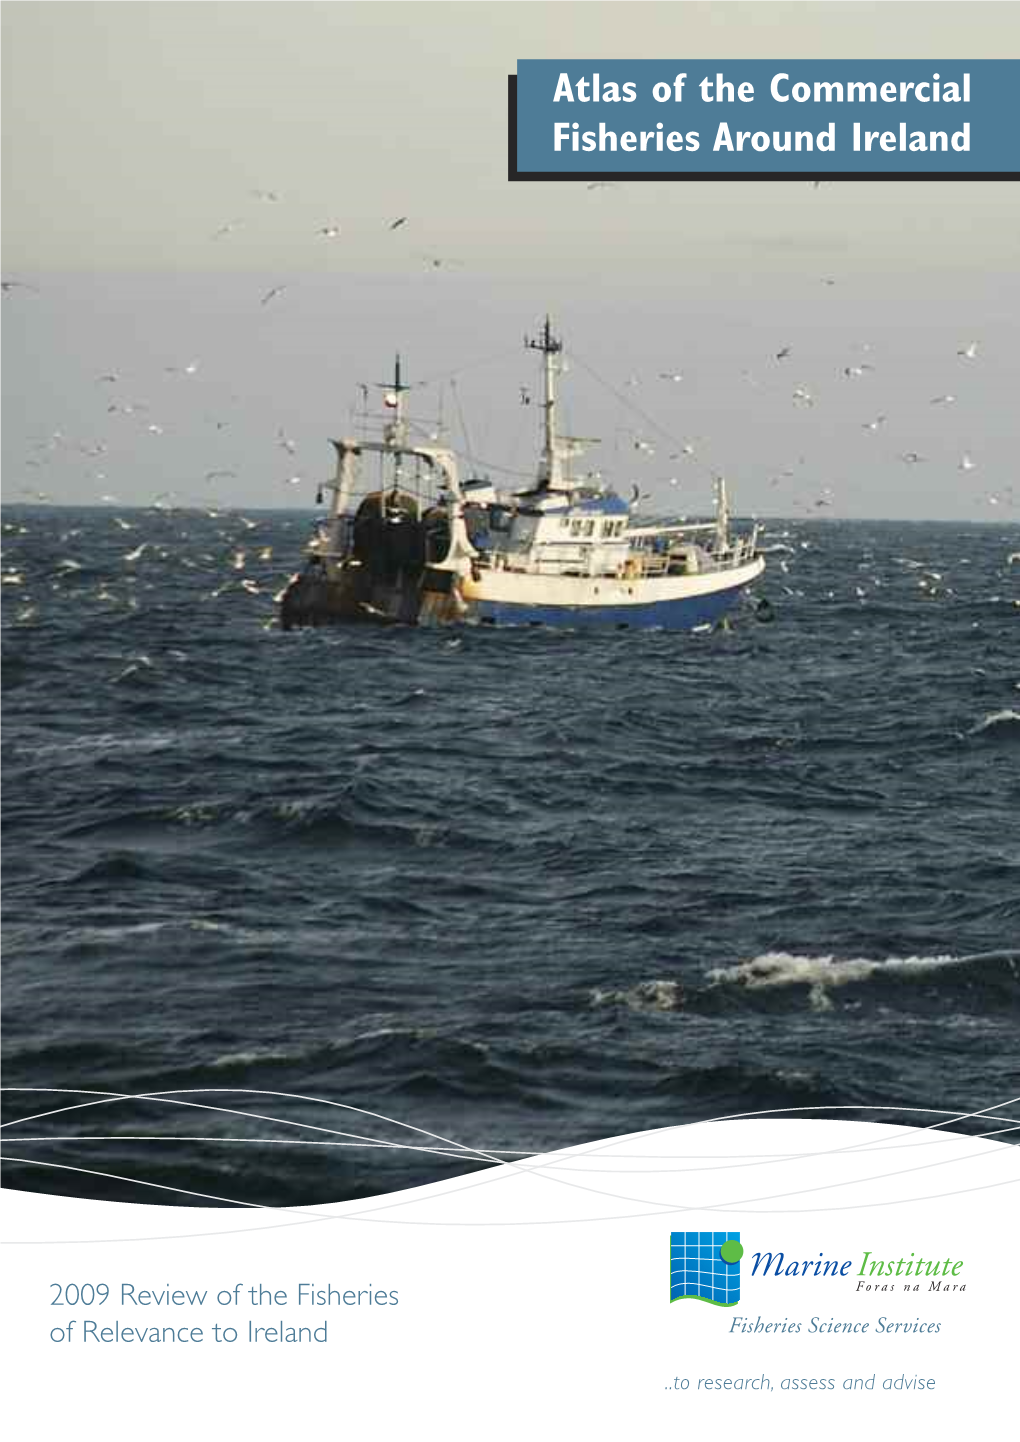 Atlas of the Commercial Fisheries Around Ireland